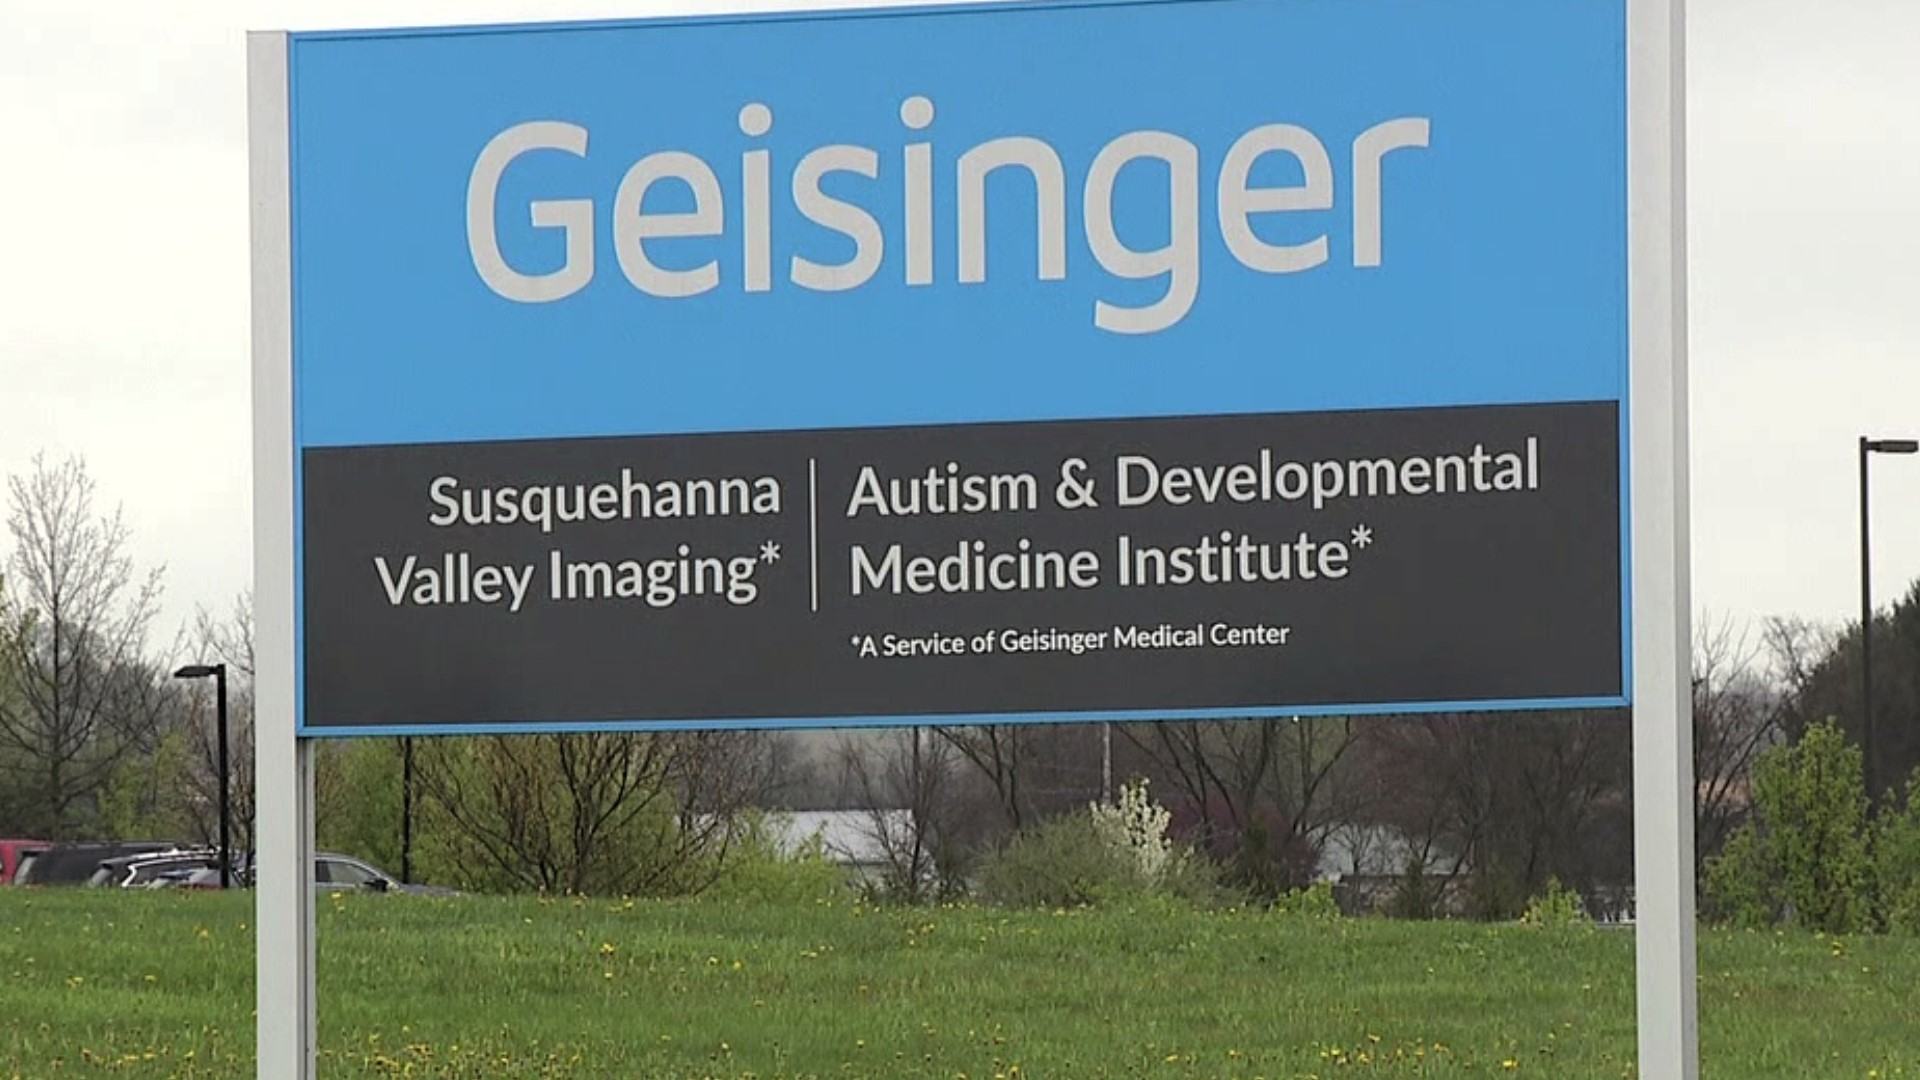 Newswatch 16's Nikki Krize spoke with an expert from the Geisinger Autism and Developmental Medicine Institute.